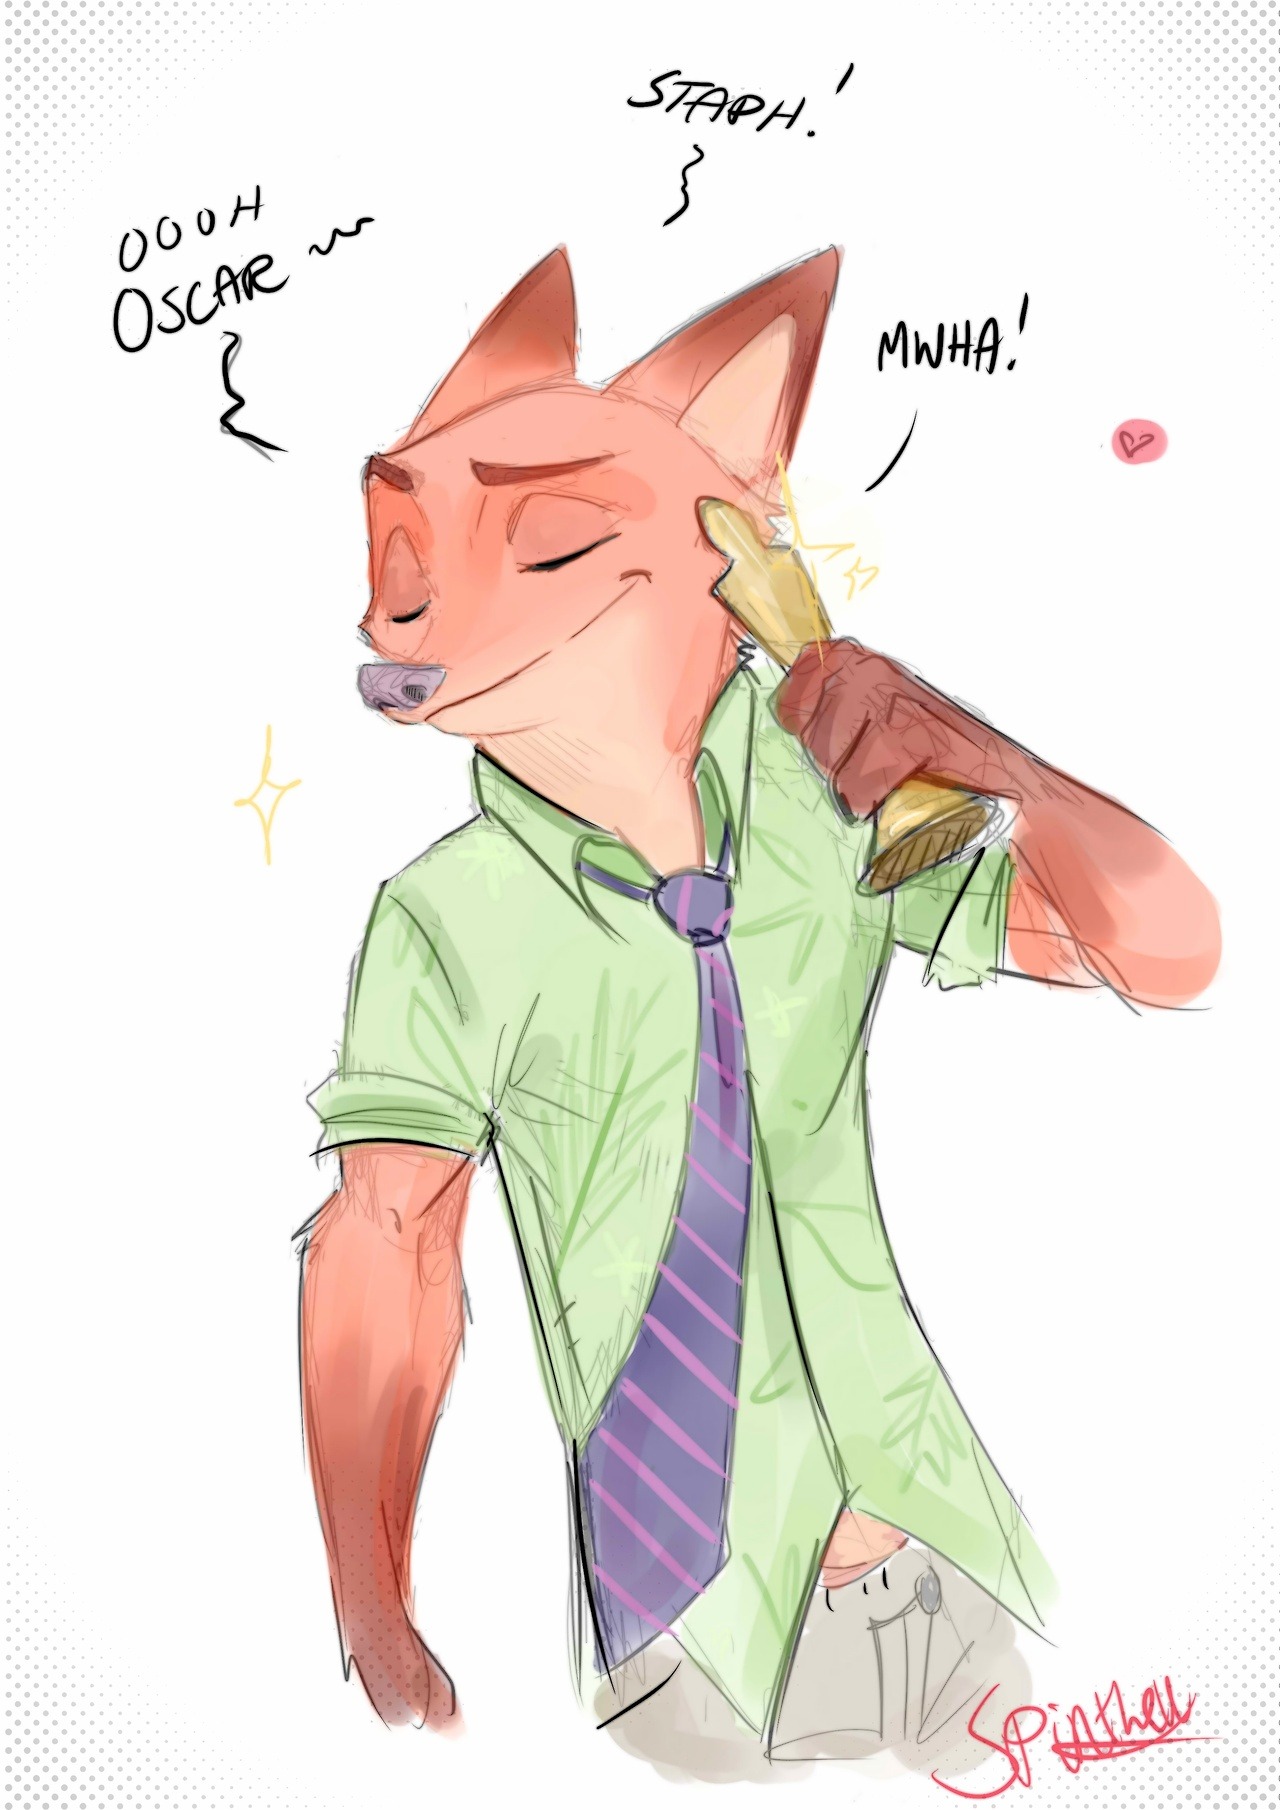 CONGRATULATIONS ZOOTOPIA
Sketched together a little something - so hella fast HAHA
This pic of Nick, yall gonna see it again in the next installment of Inter Schminter hahah! I know I said I would do Maxton REacts - and I will..just had to do...